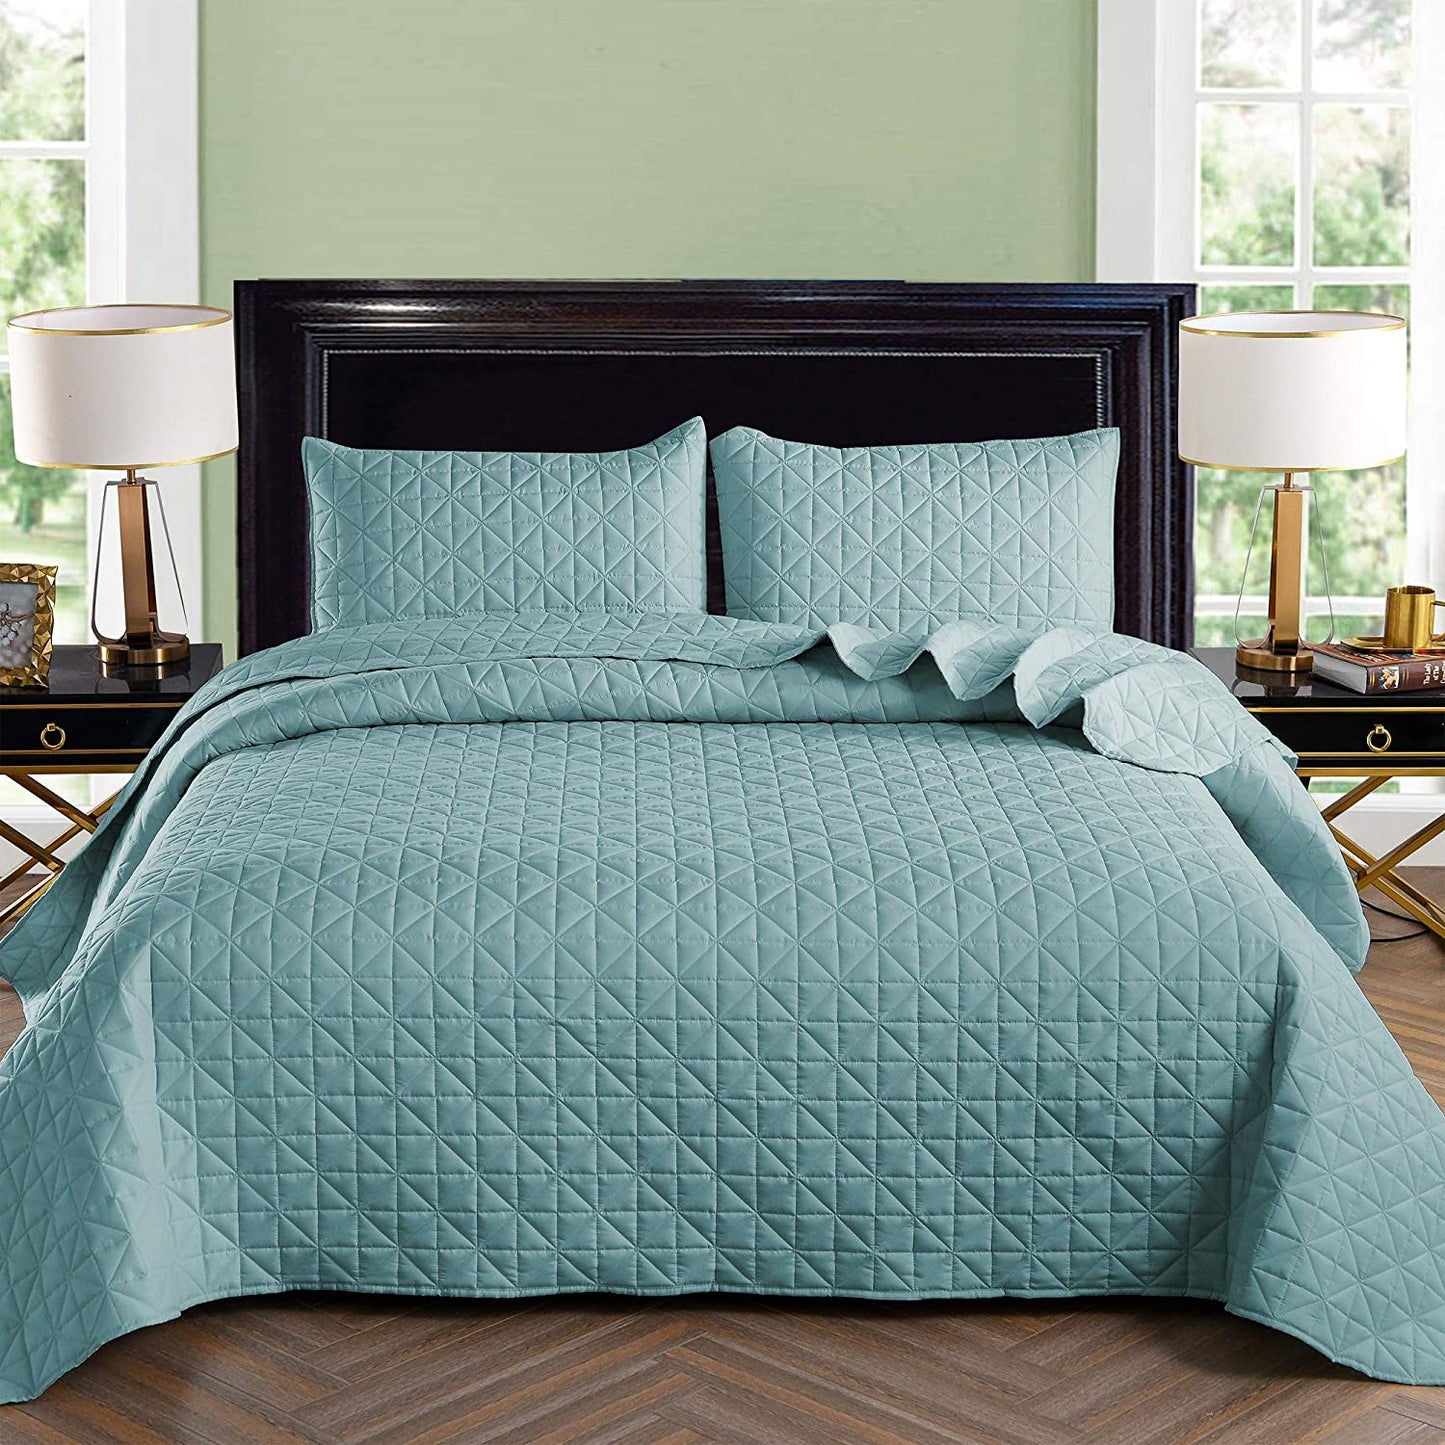 Pure Bedding Quilt Set Full/Queen Size Aqua - Oversized Bedspread - Soft  Microfiber Lightweight Coverlet for All Season - 3 Piece Includes 1 Quilt  and